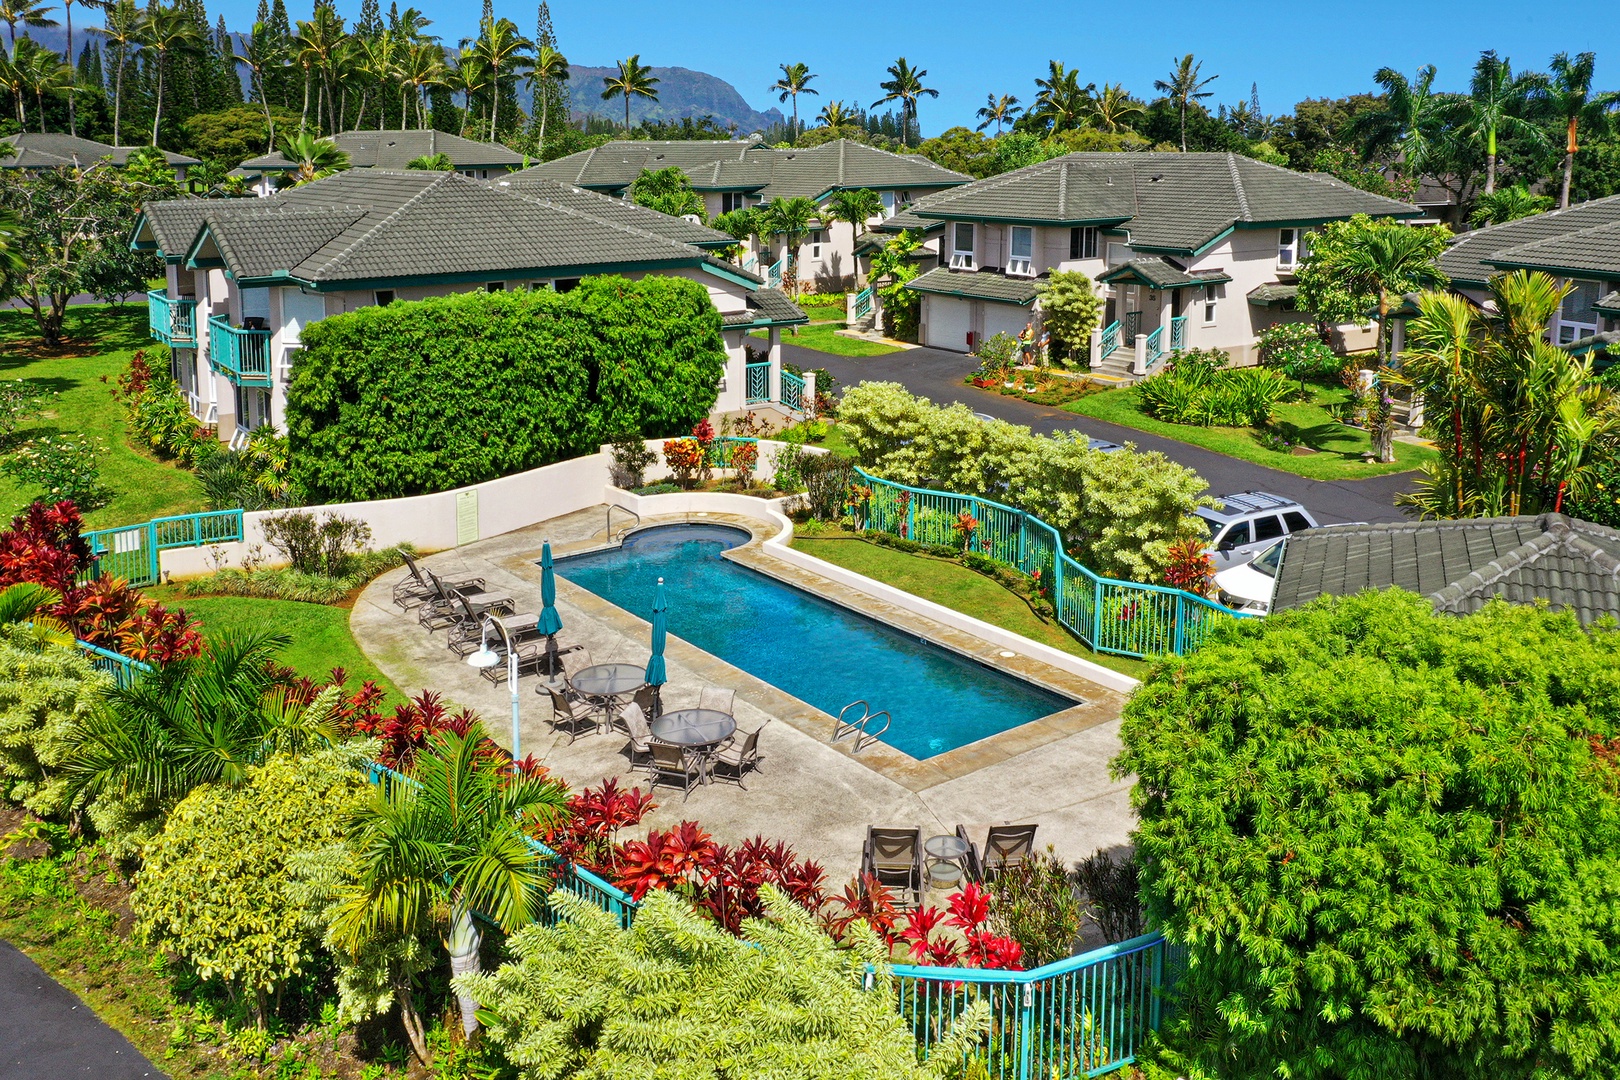 Princeville Vacation Rentals, Villas on the Prince #28 - Take a refreshing dip in the community pool or soak up the sun poolside